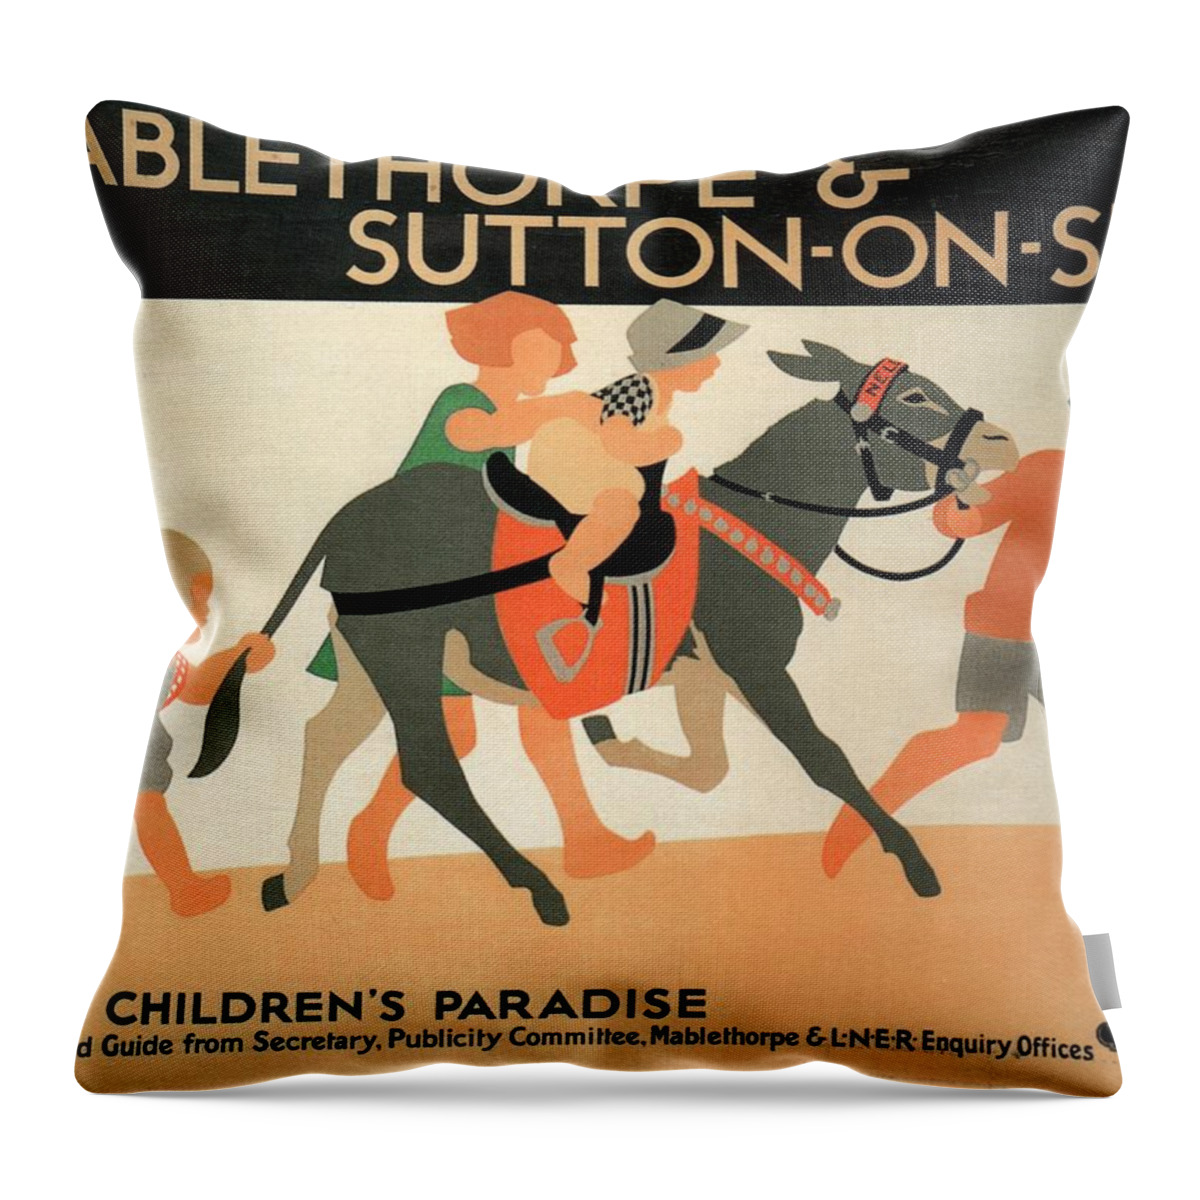 Mablethorpe Throw Pillow featuring the painting Mablethorpe and Sutton-on-sea - Children's Paradise - Vintage Poster by Studio Grafiikka